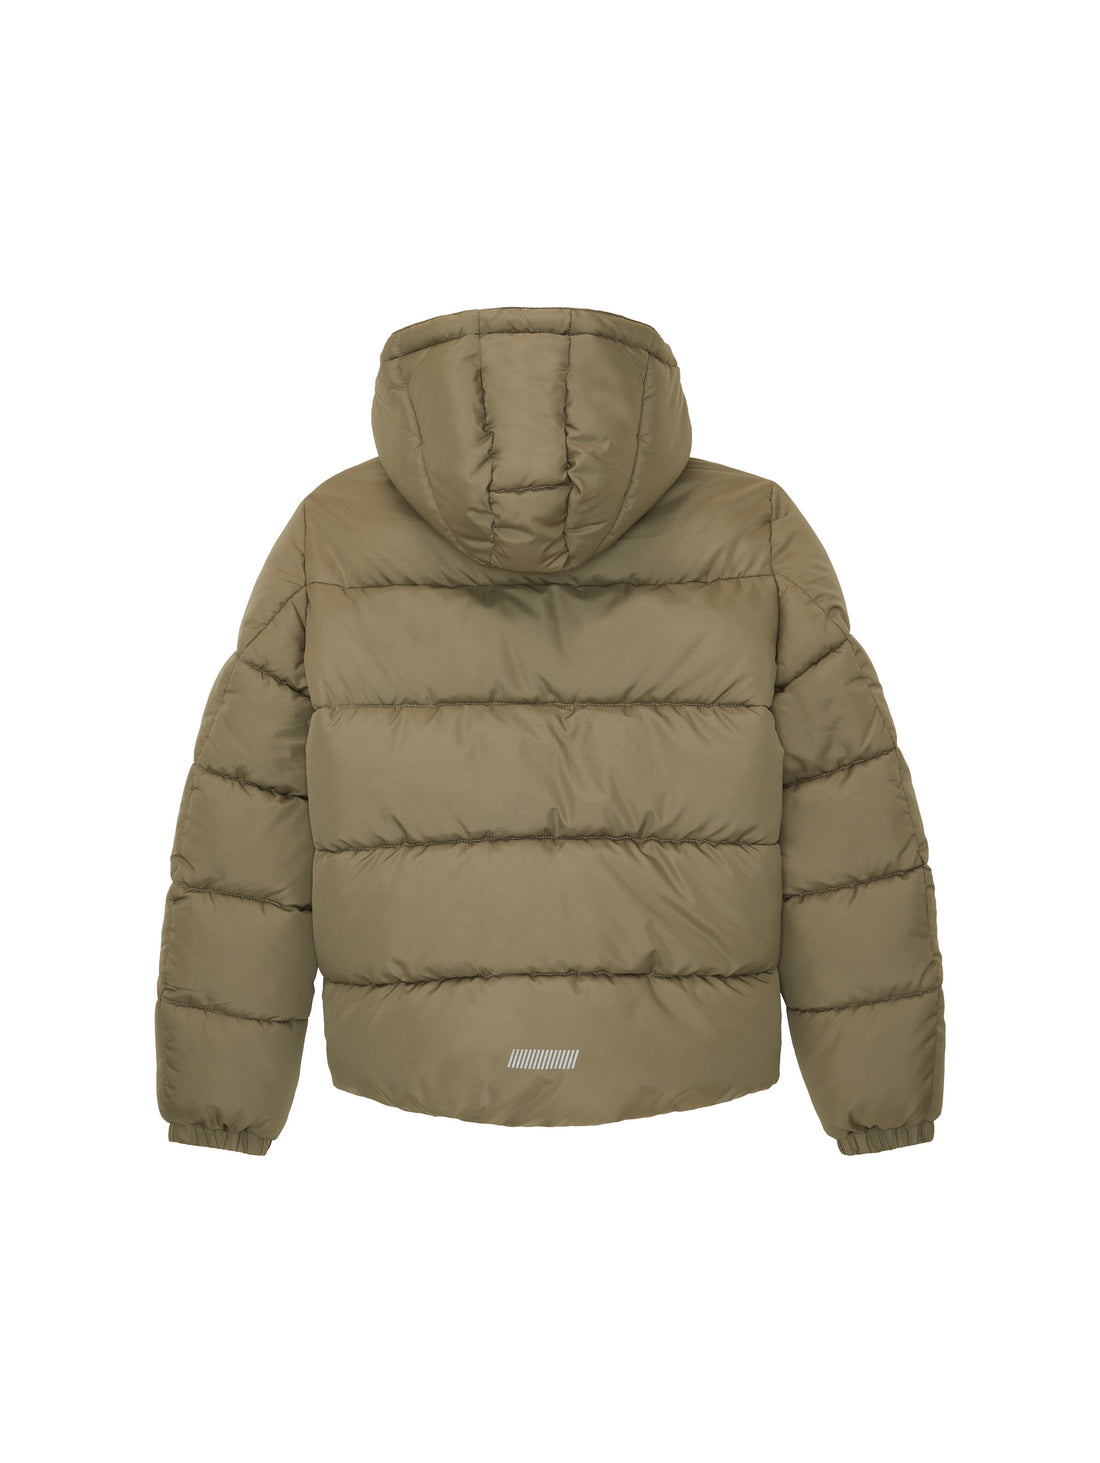 Heavy Puffer Jacket With Hood_1038540_10415_02